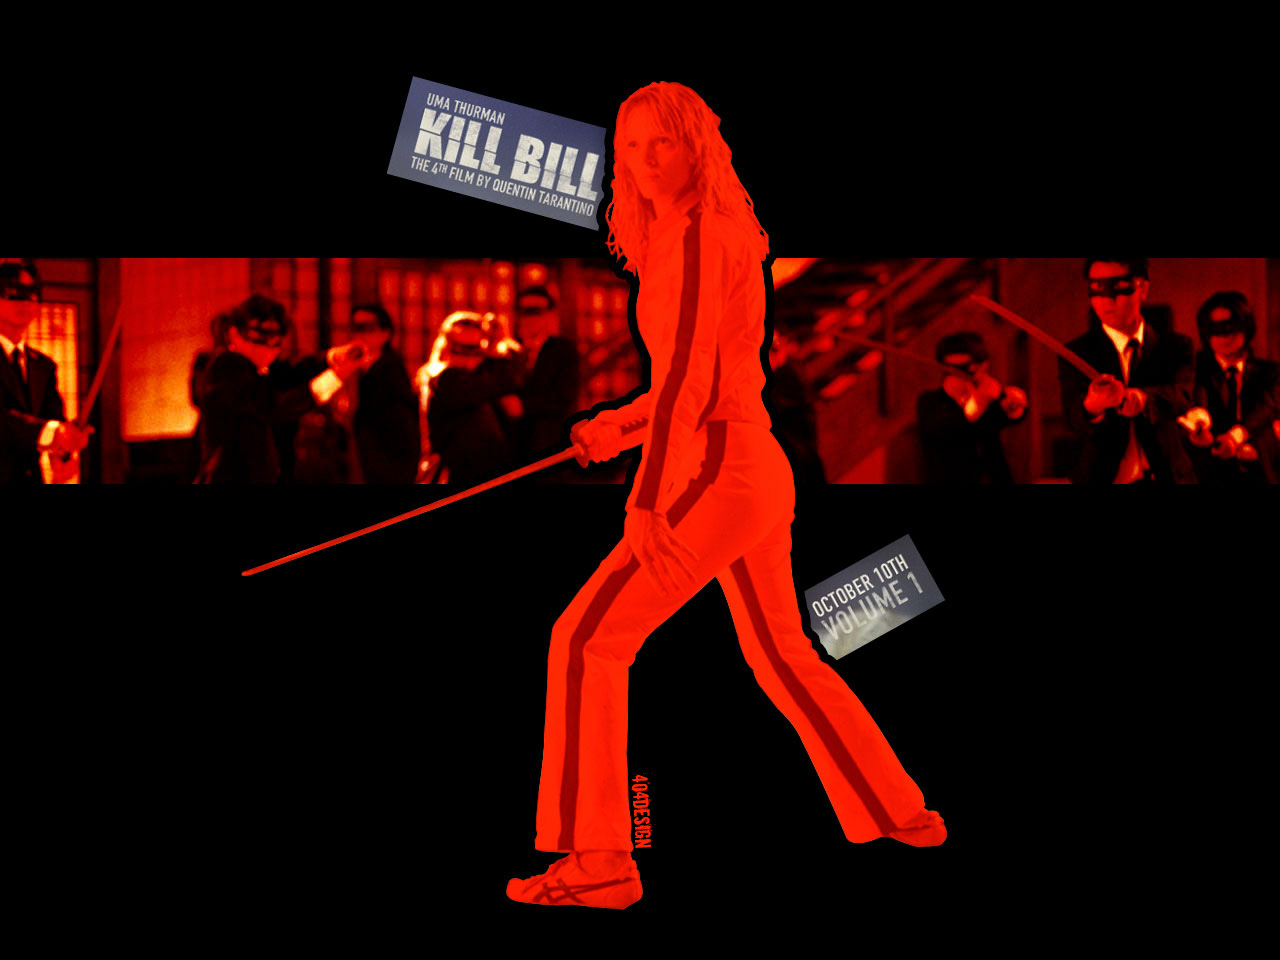 Of Kill Bill Full Movie Dailymotion May Watch Movies Online